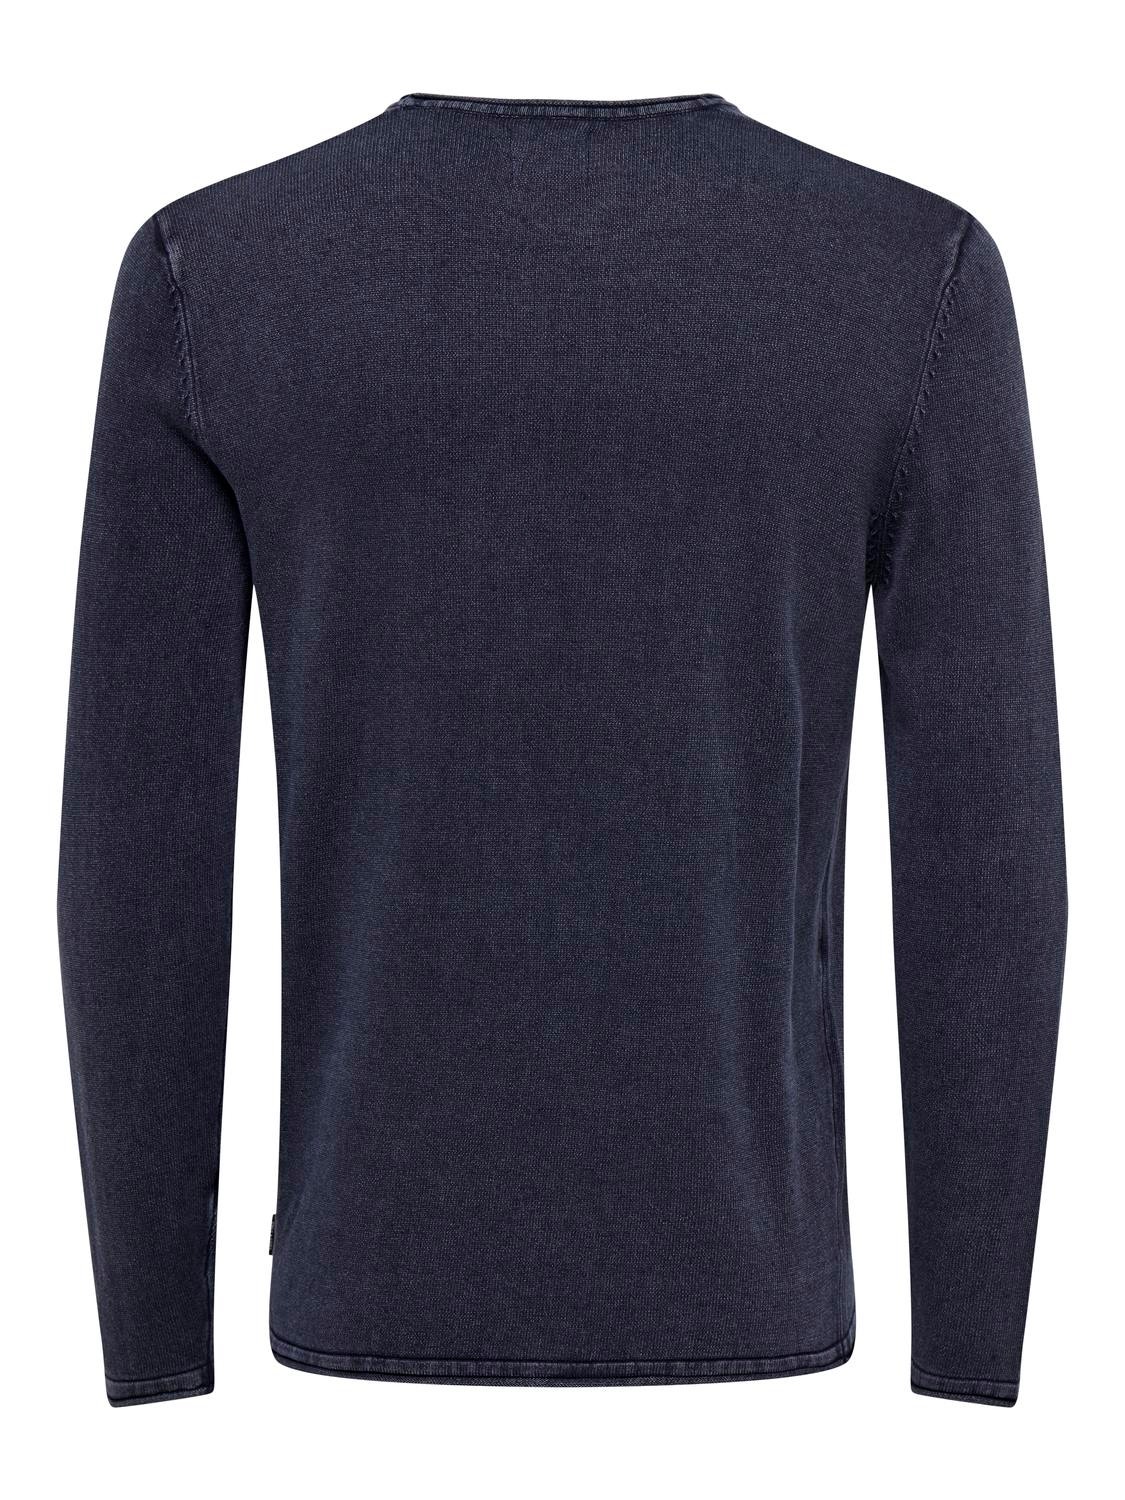 ONLY & SONS Crew neck knitted pullover -Dress Blues - 22006806